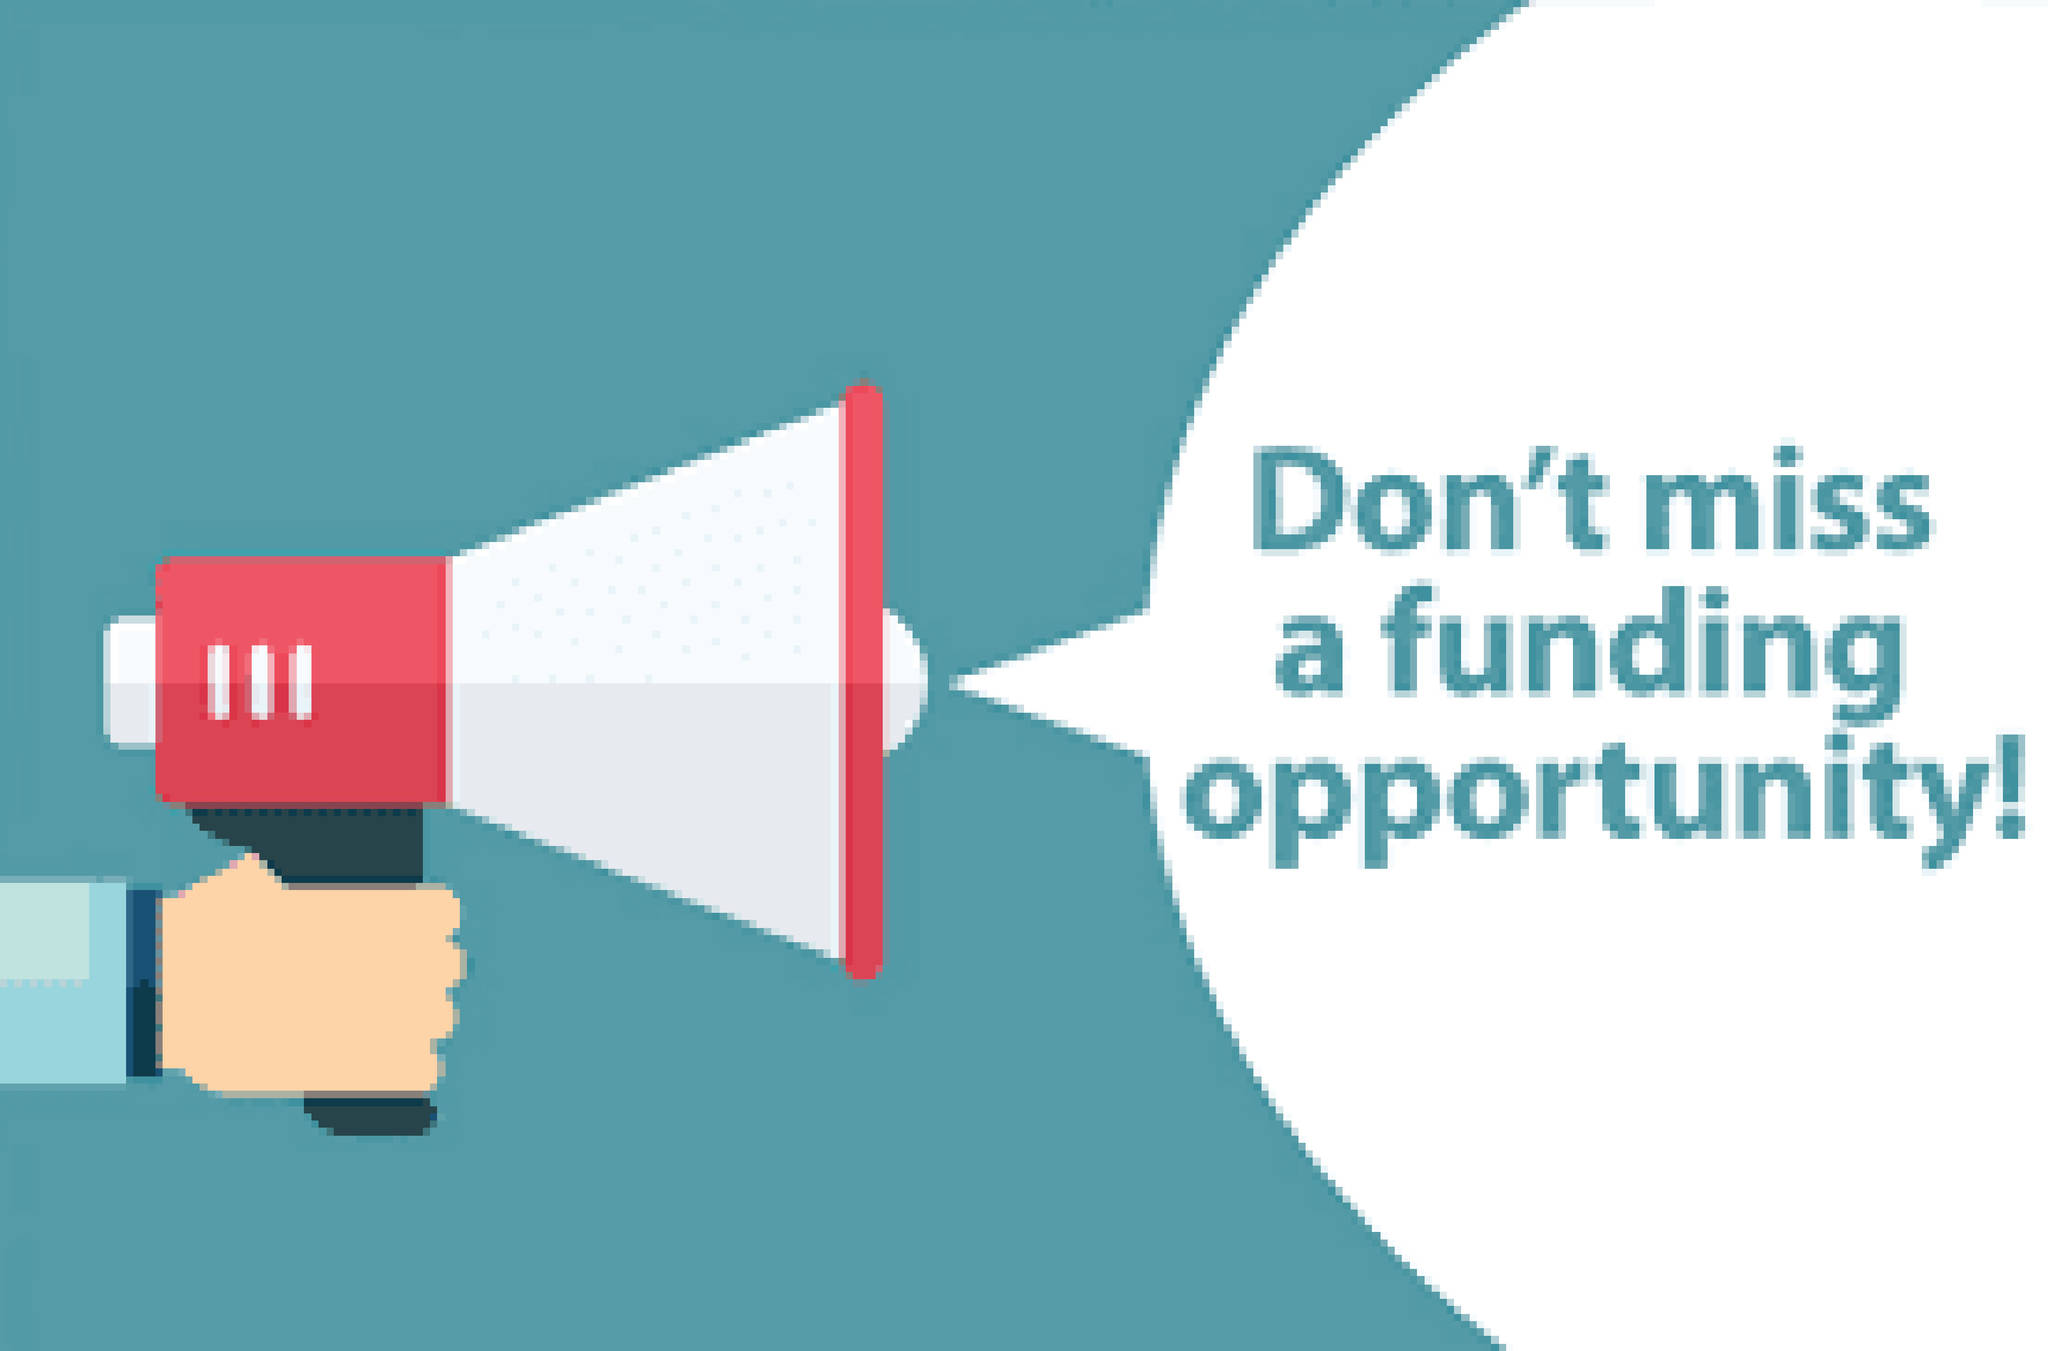 Small organizations invited to apply now for funding